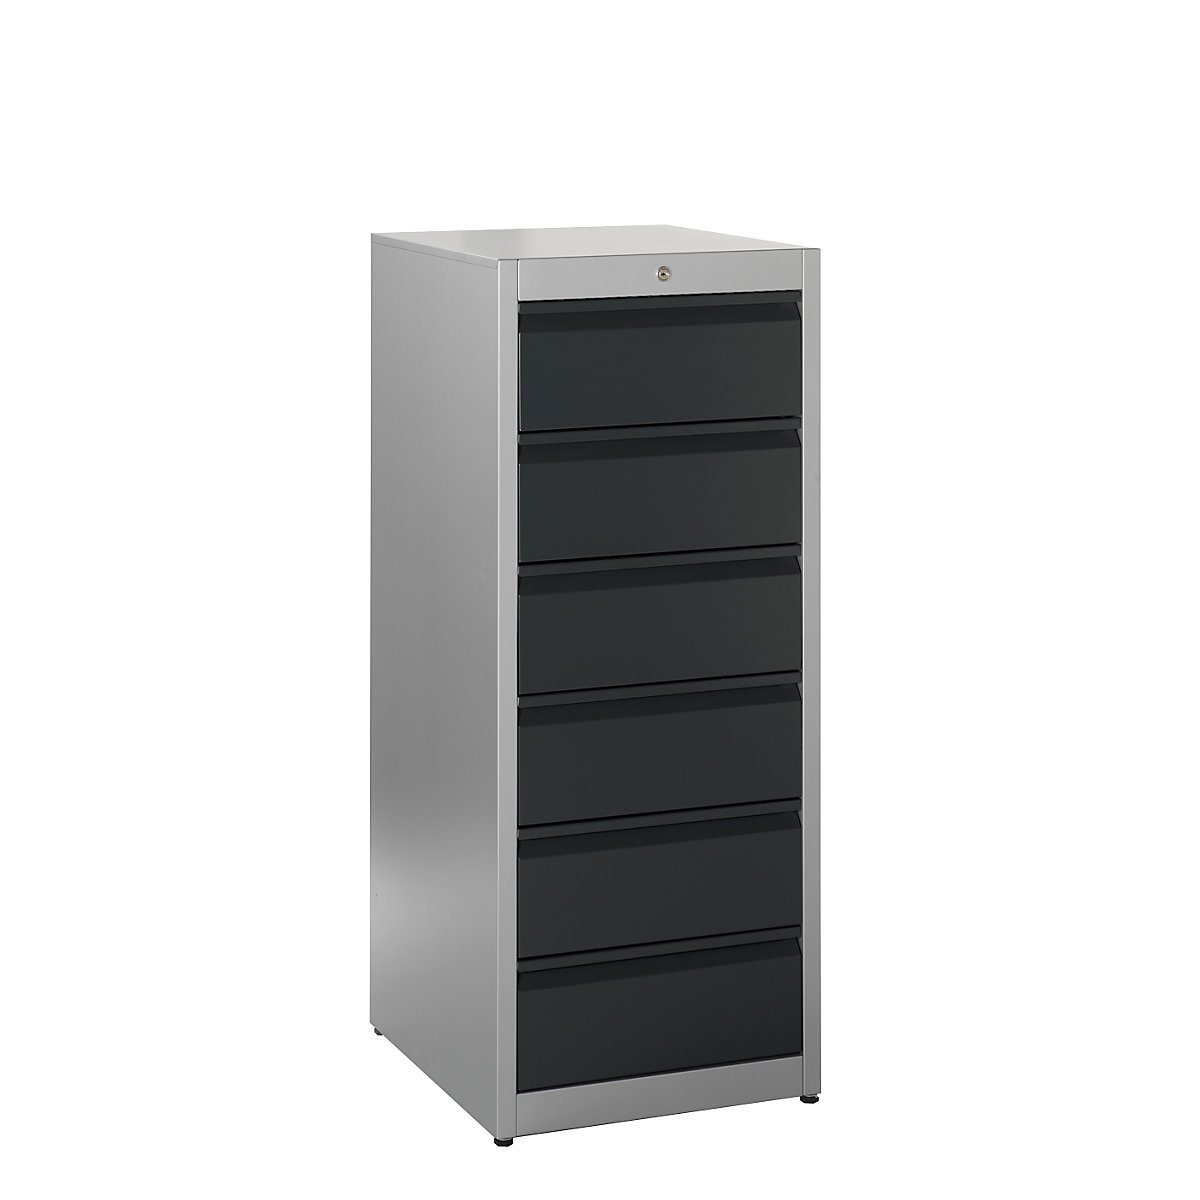 Card file cabinet, grip rails – mauser, 6 drawers, 2-track, white aluminium / charcoal-4